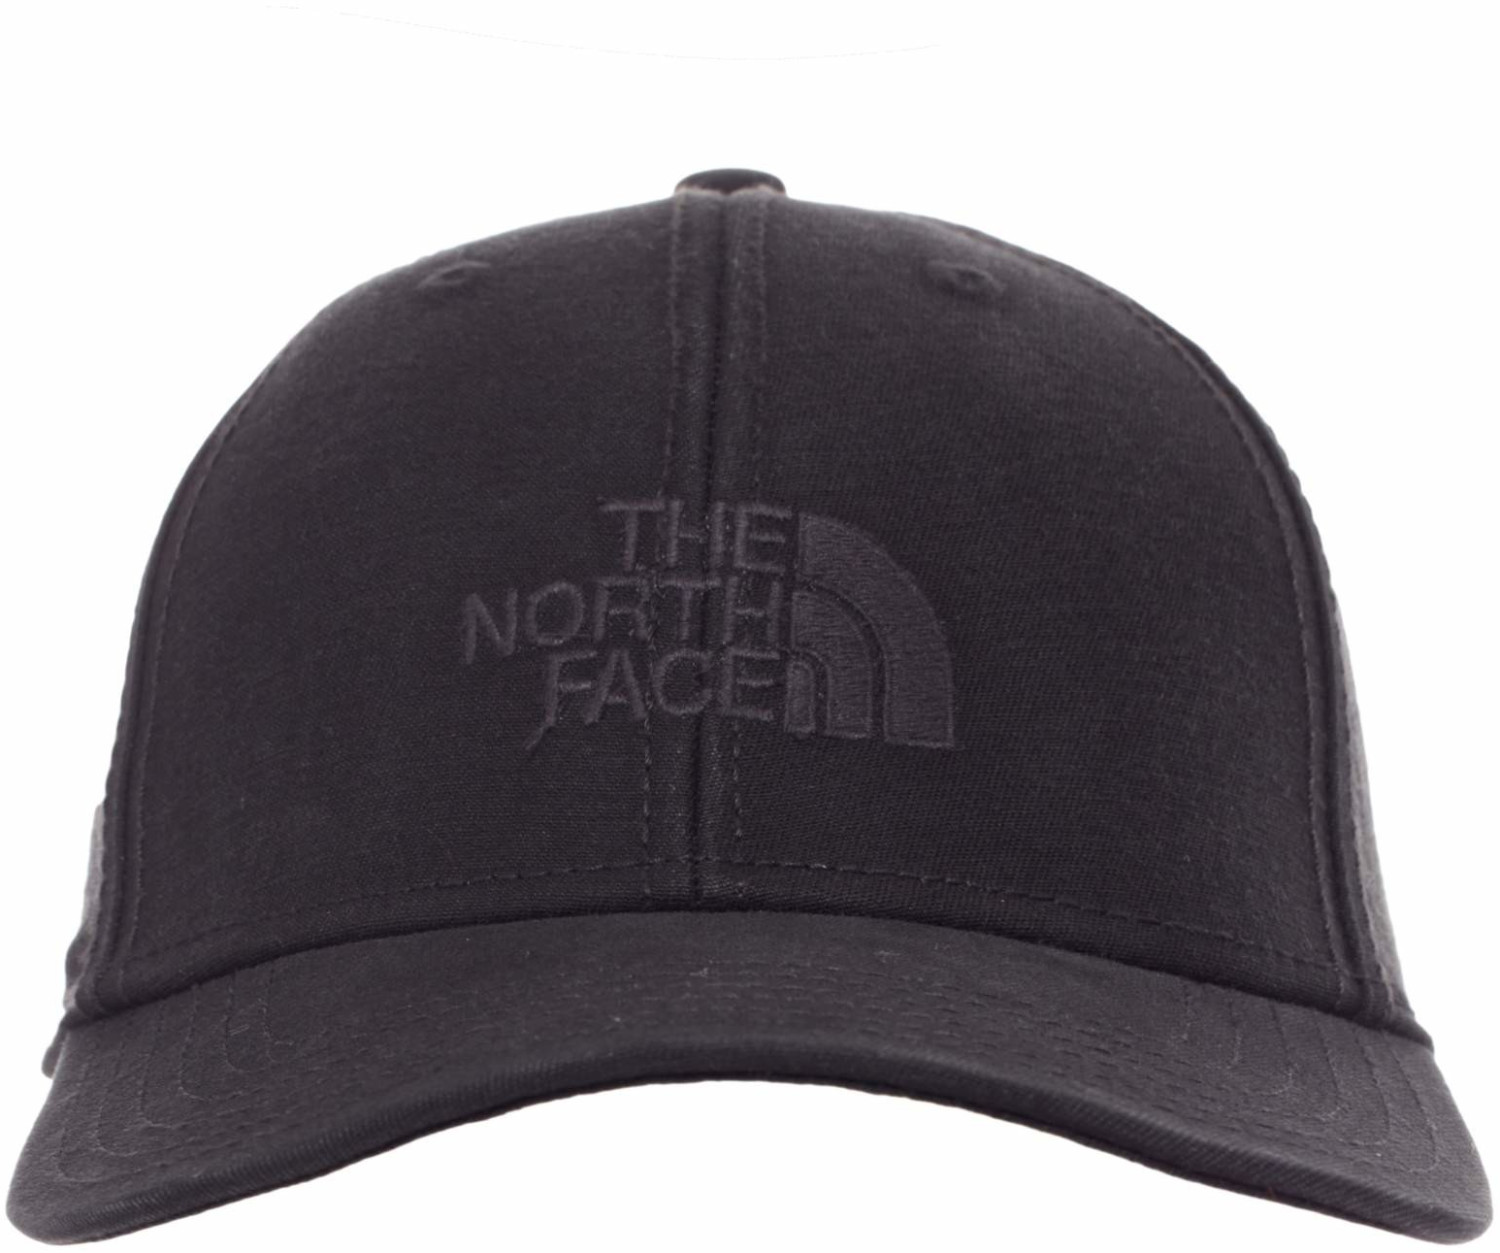 Buy The North Face 66 Classic Cap black from £20.00 (Today) – Best ...